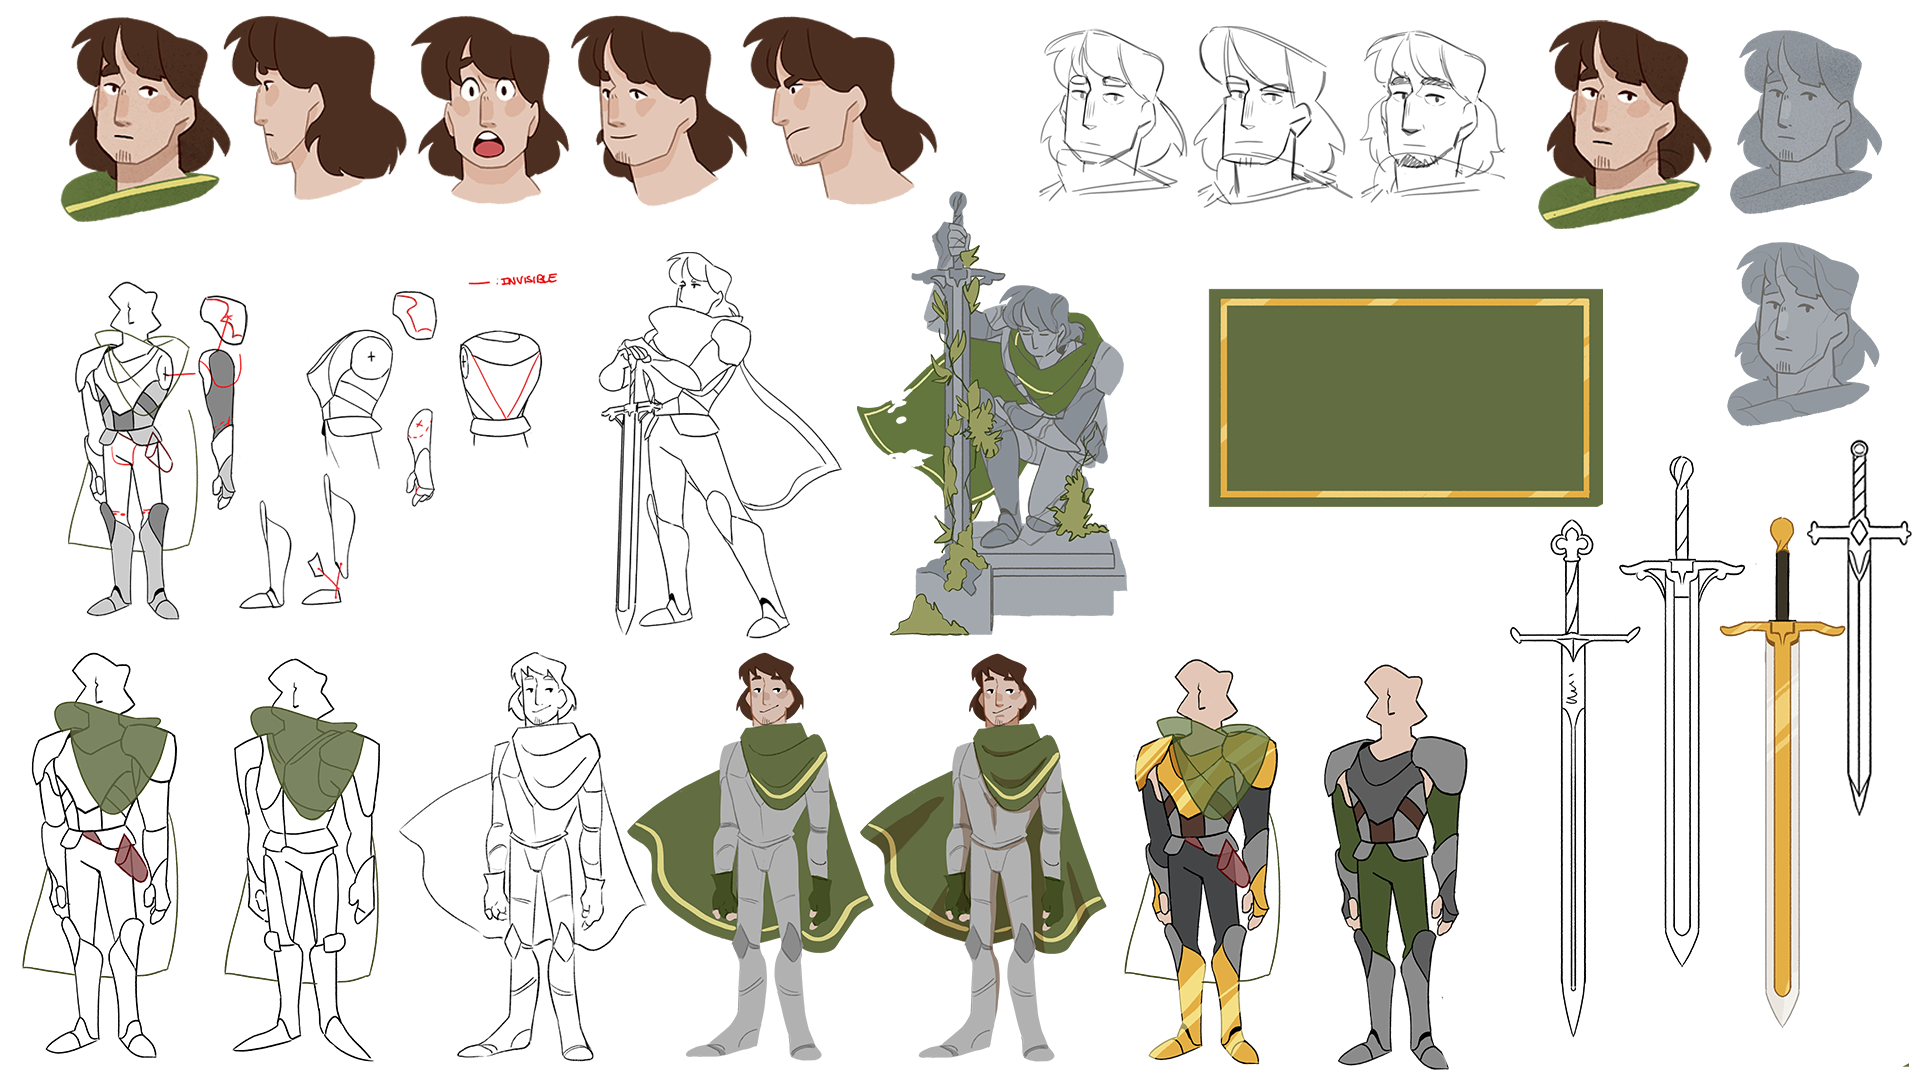 Concept art page of the character of Elias, a medieval knight. On the top is a turnaround of the character’s head, as well as different version of the face. On the left are versions of the armor and details of the sections, as well as color tests. On the right are swords, a statue version of the character, and details of the cape.